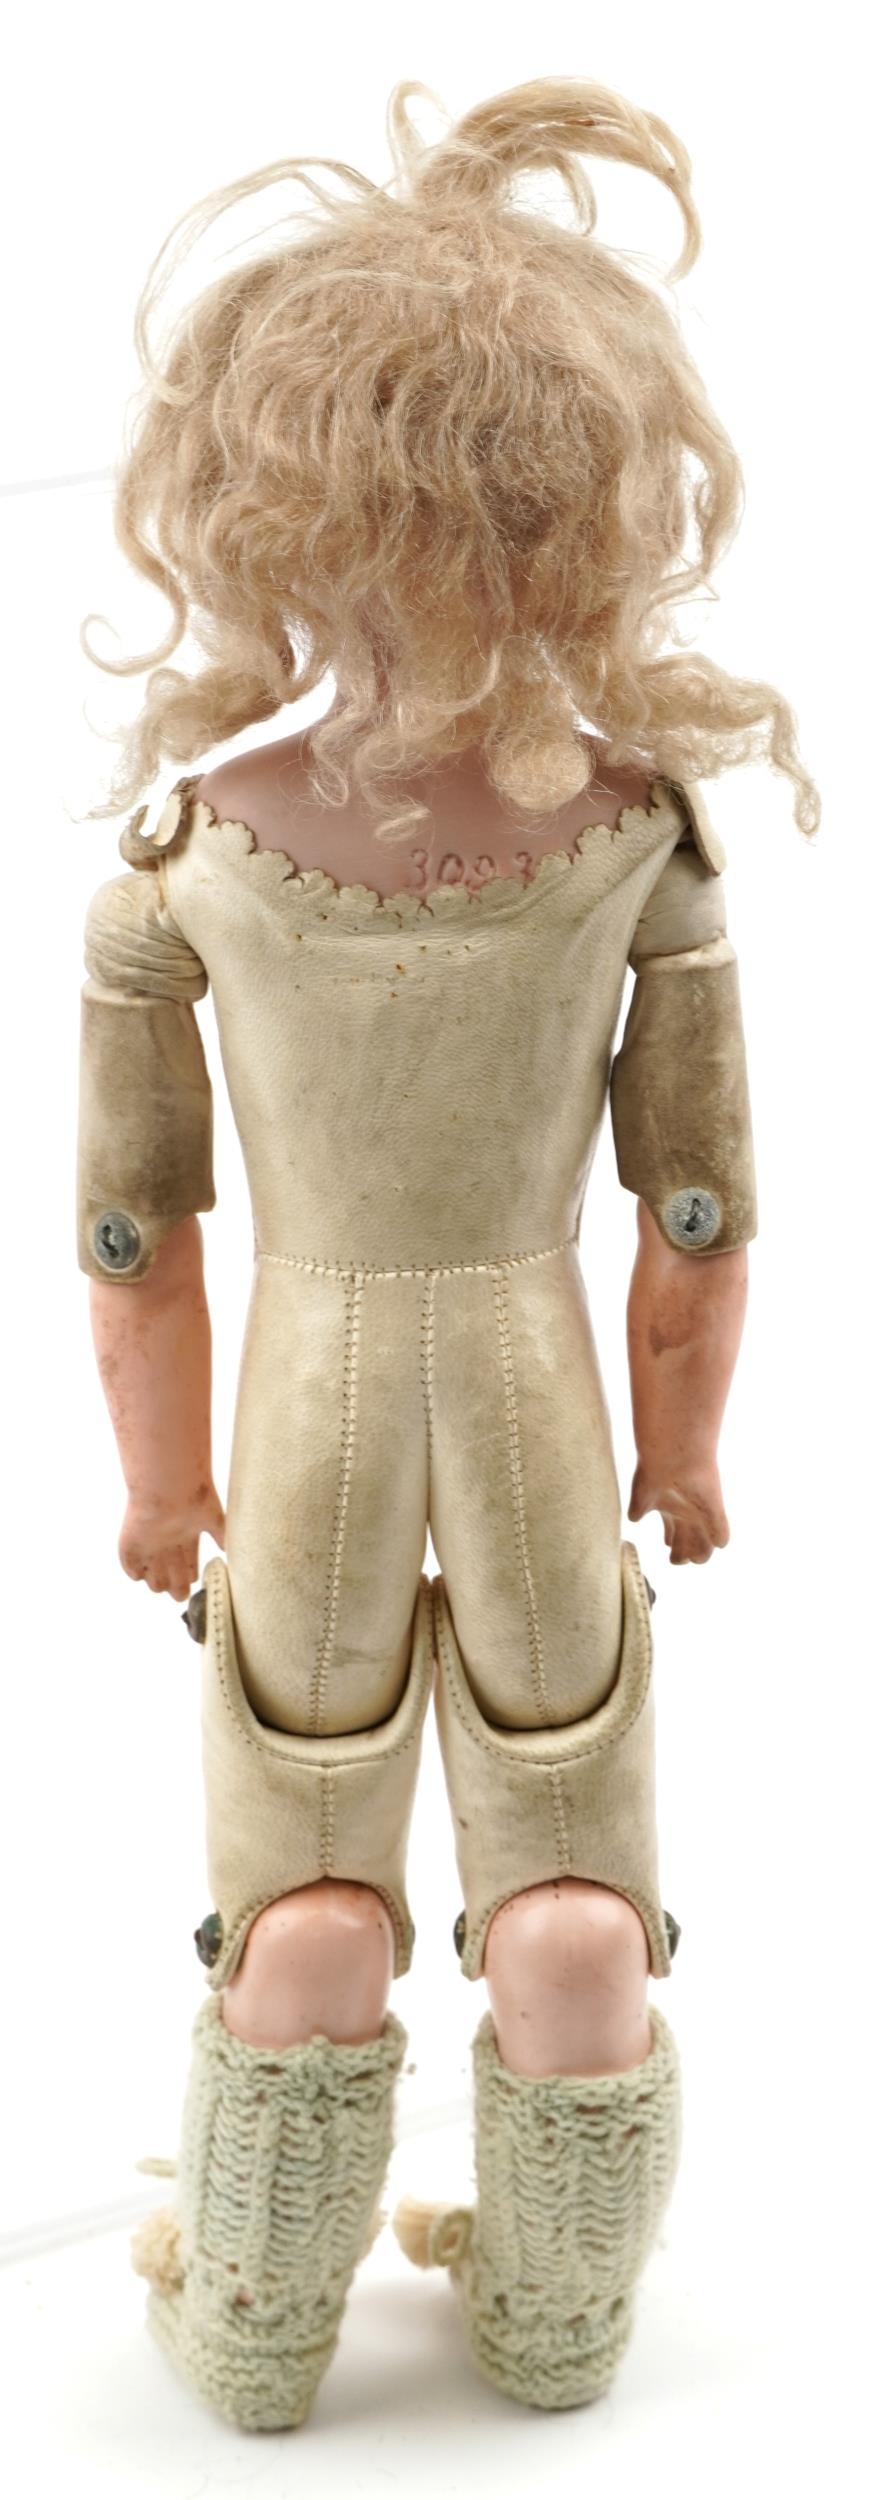 Antique bisque headed and leather fashion doll with open close eyes and articulated limbs, - Image 2 of 3